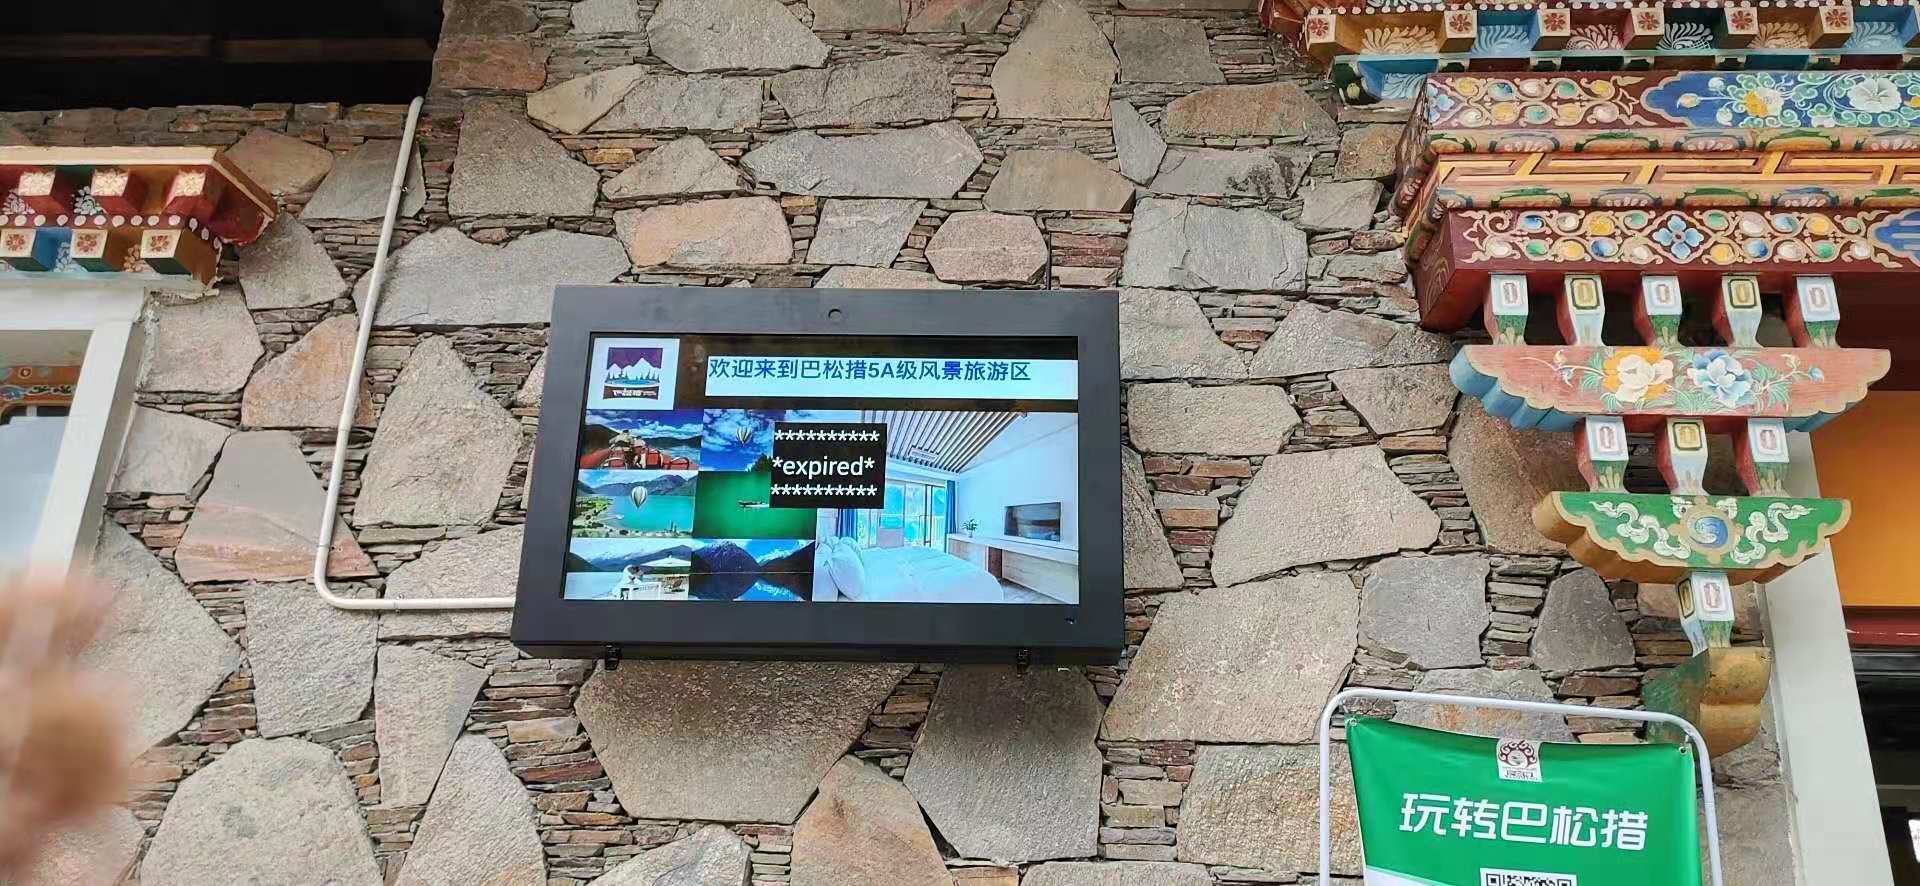 Hot sales 32 inch wall mount lcd advertising display with waterproof IP56